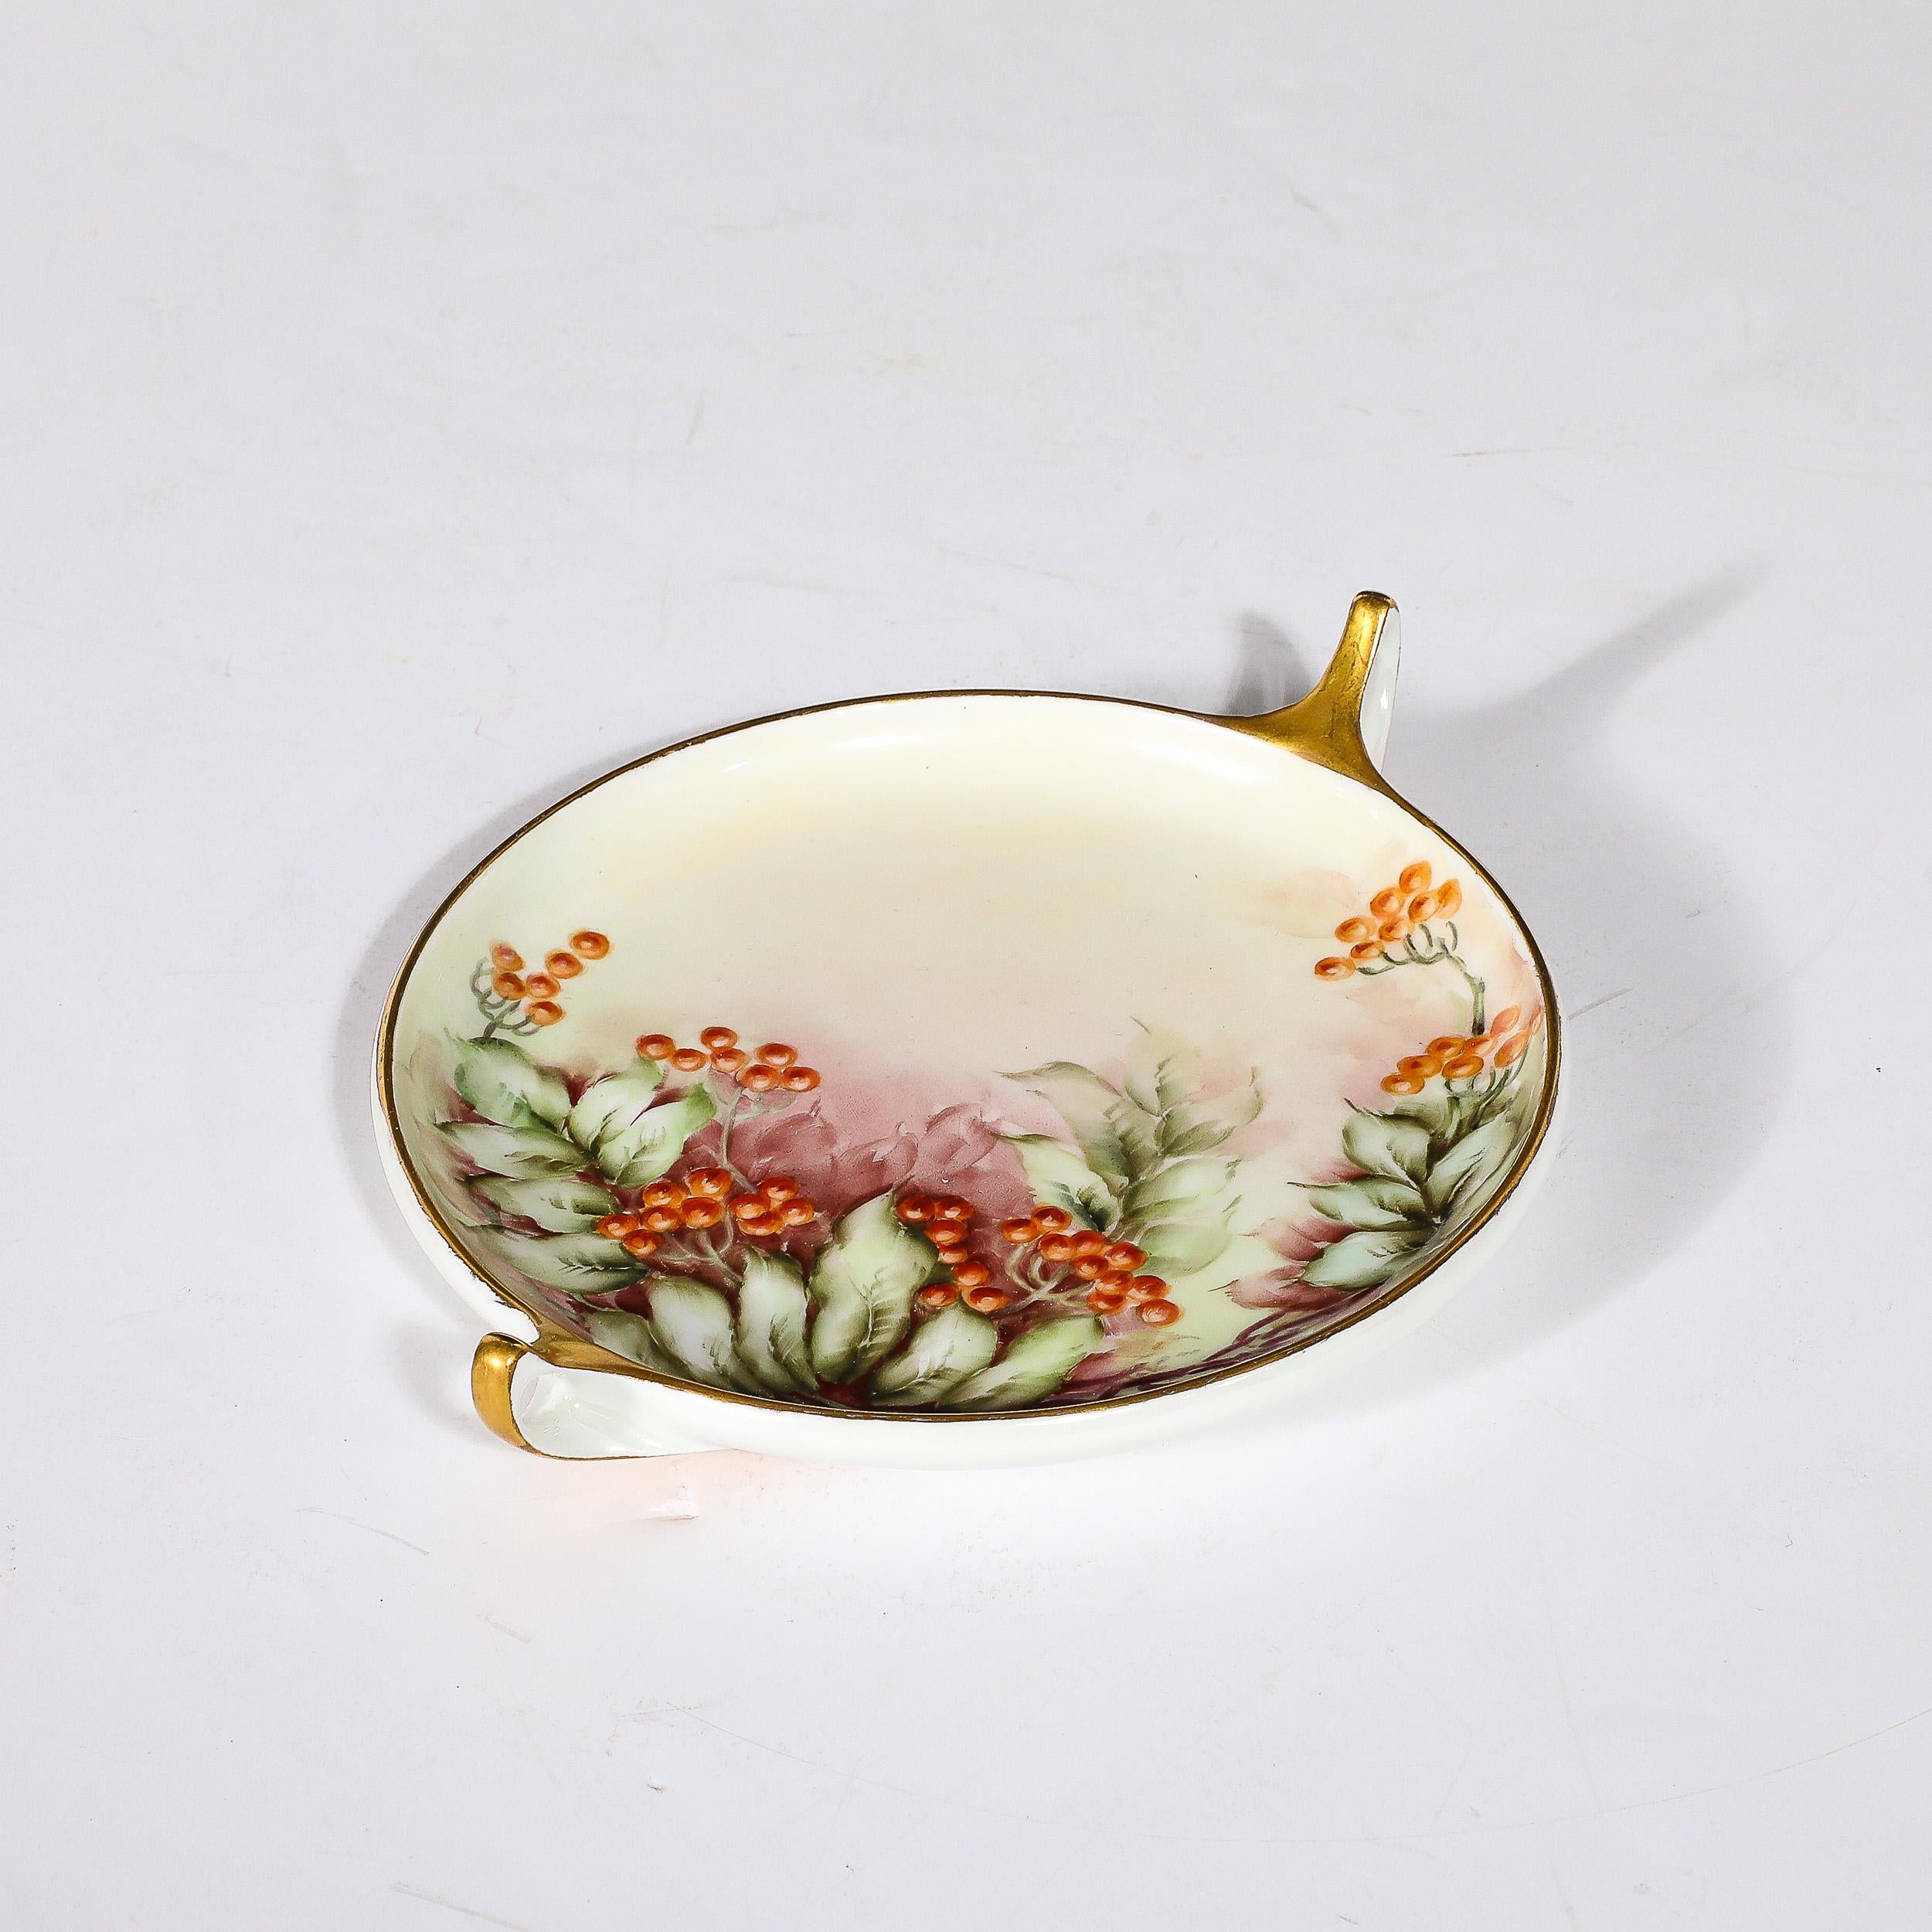 This beautiful Art Nouveau  Porcelain Dish W/Gilt Handles & Natural Motif in the Donatello Pattern is by the esteemed manufacturer Rosenthal and originates from Germany, Circa 1912. Features a beautiful rounded form and stylized gilt handles and